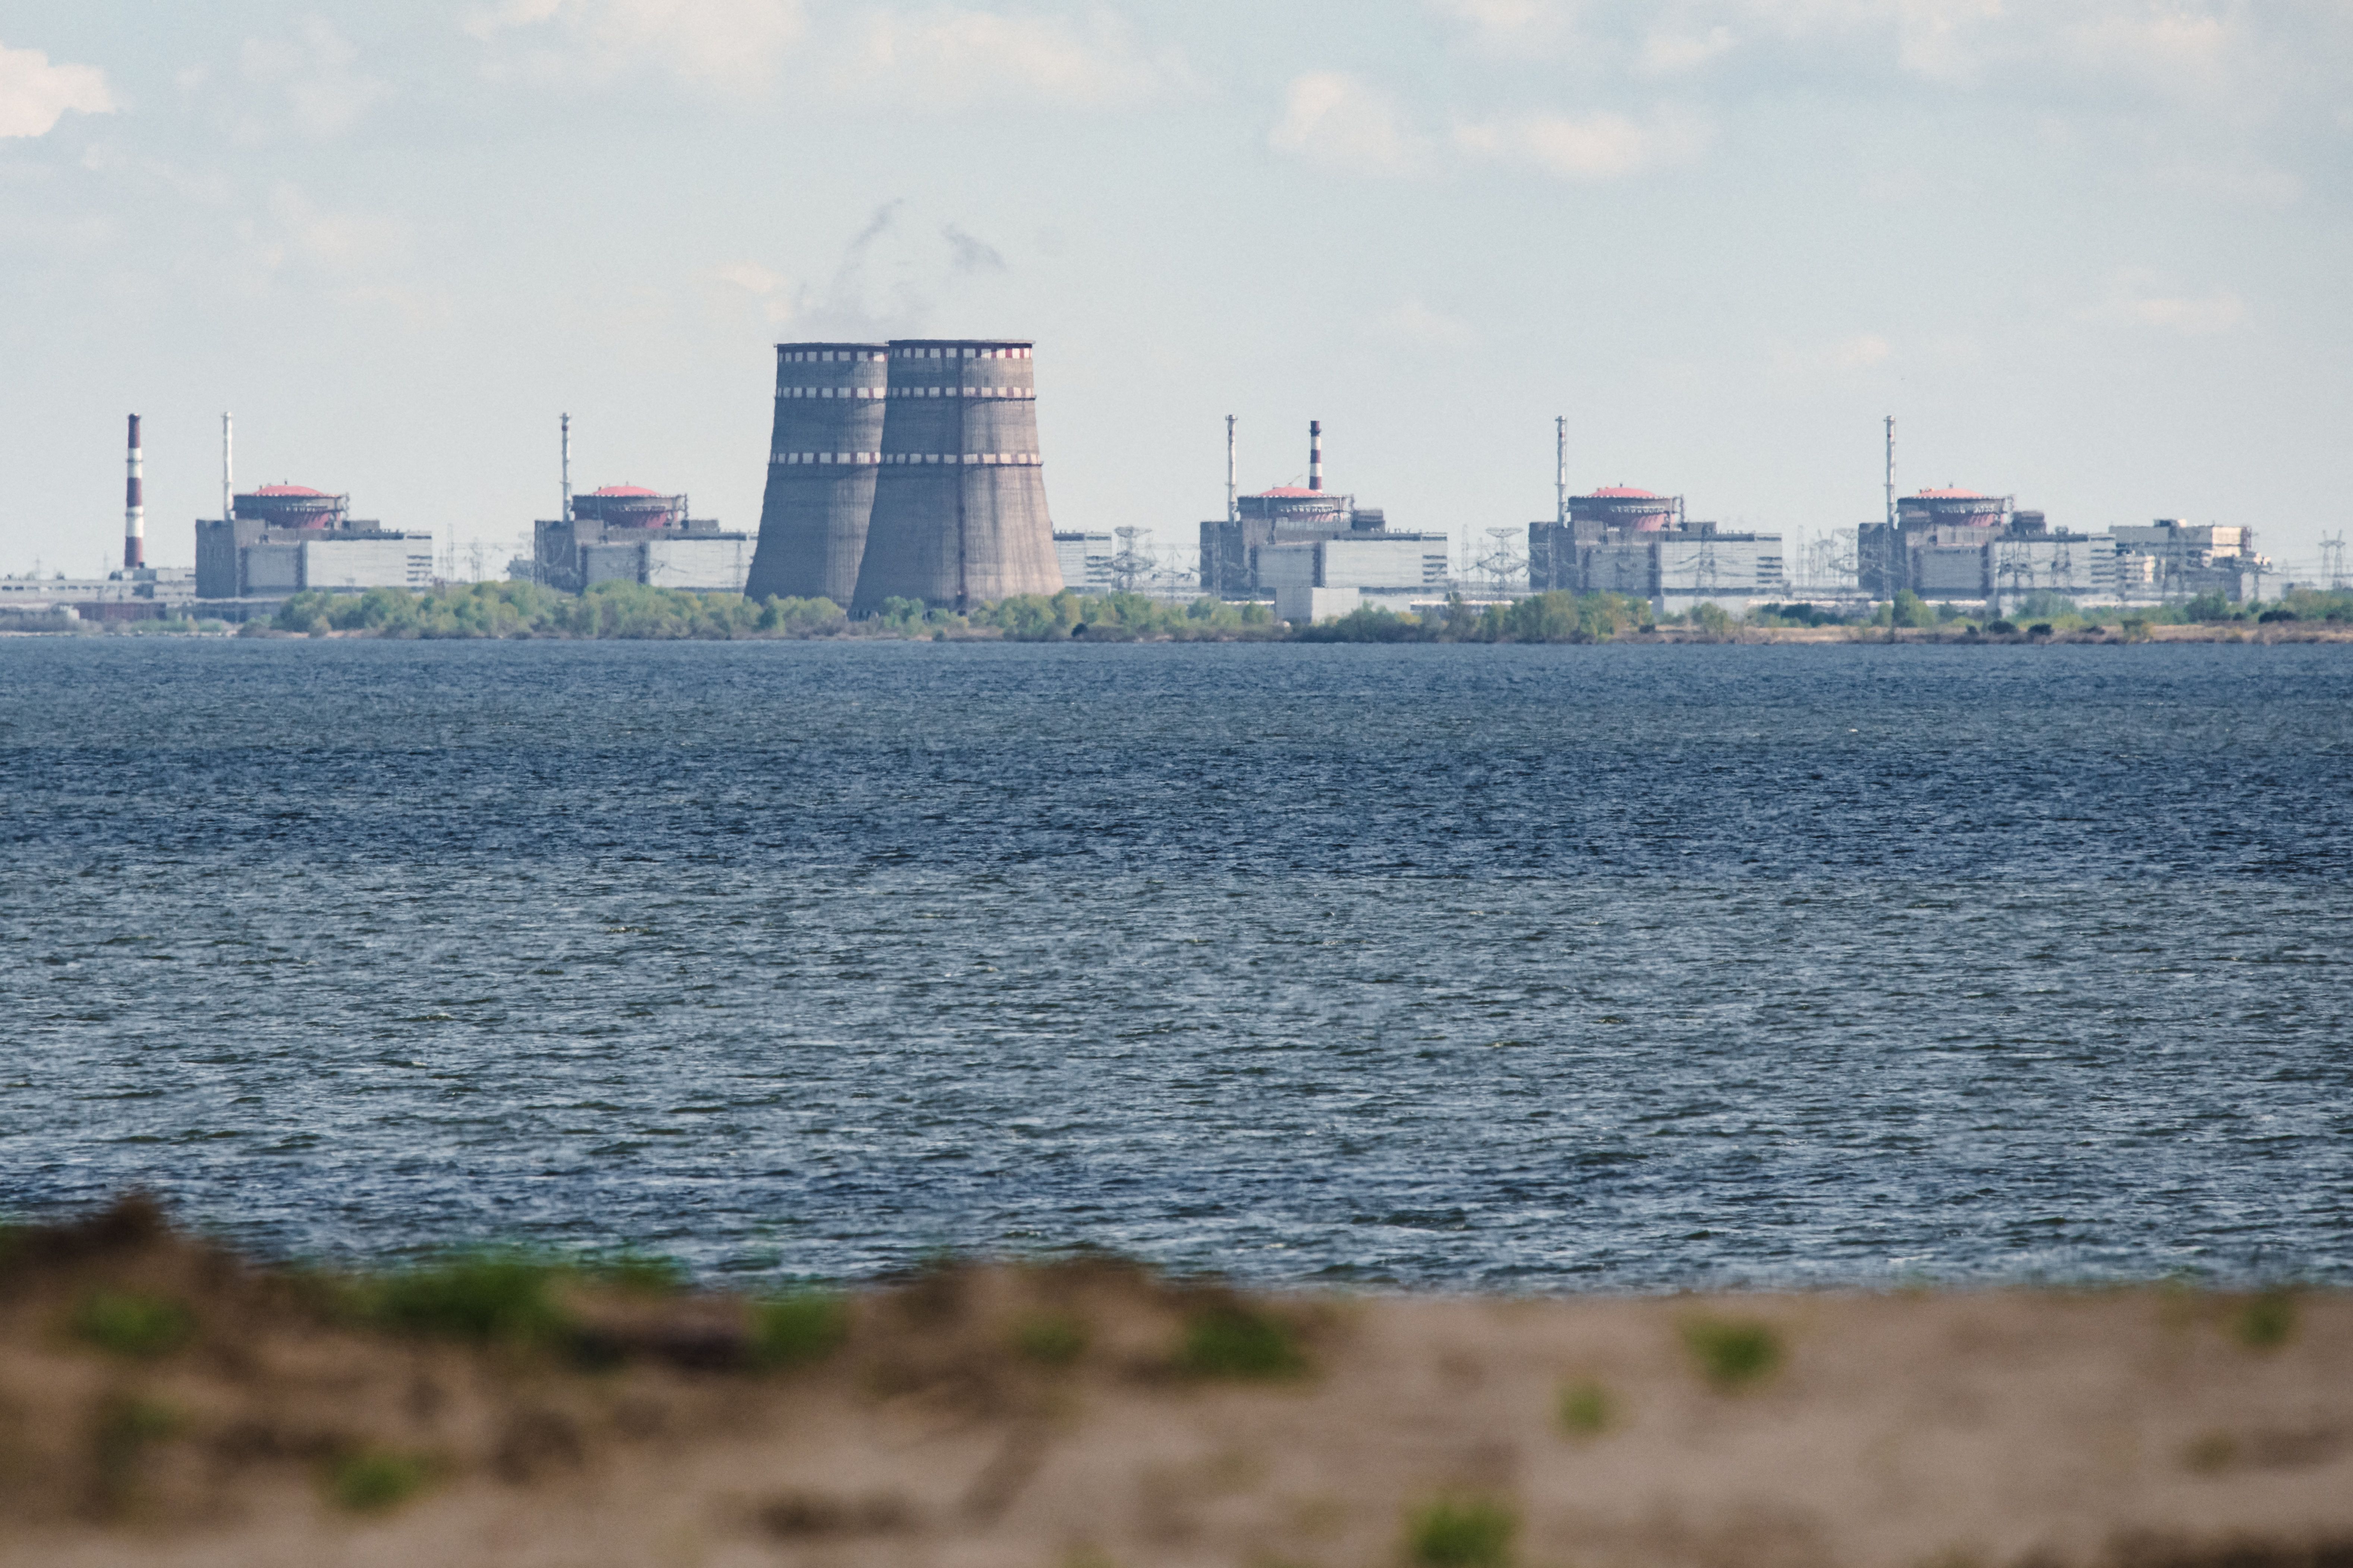 A general view shows the Zaporizhzhia nuclear power plant, situated in the Russian-controlled area of ​​Enerhodar, seen from Nikopol in April 27, 2022.